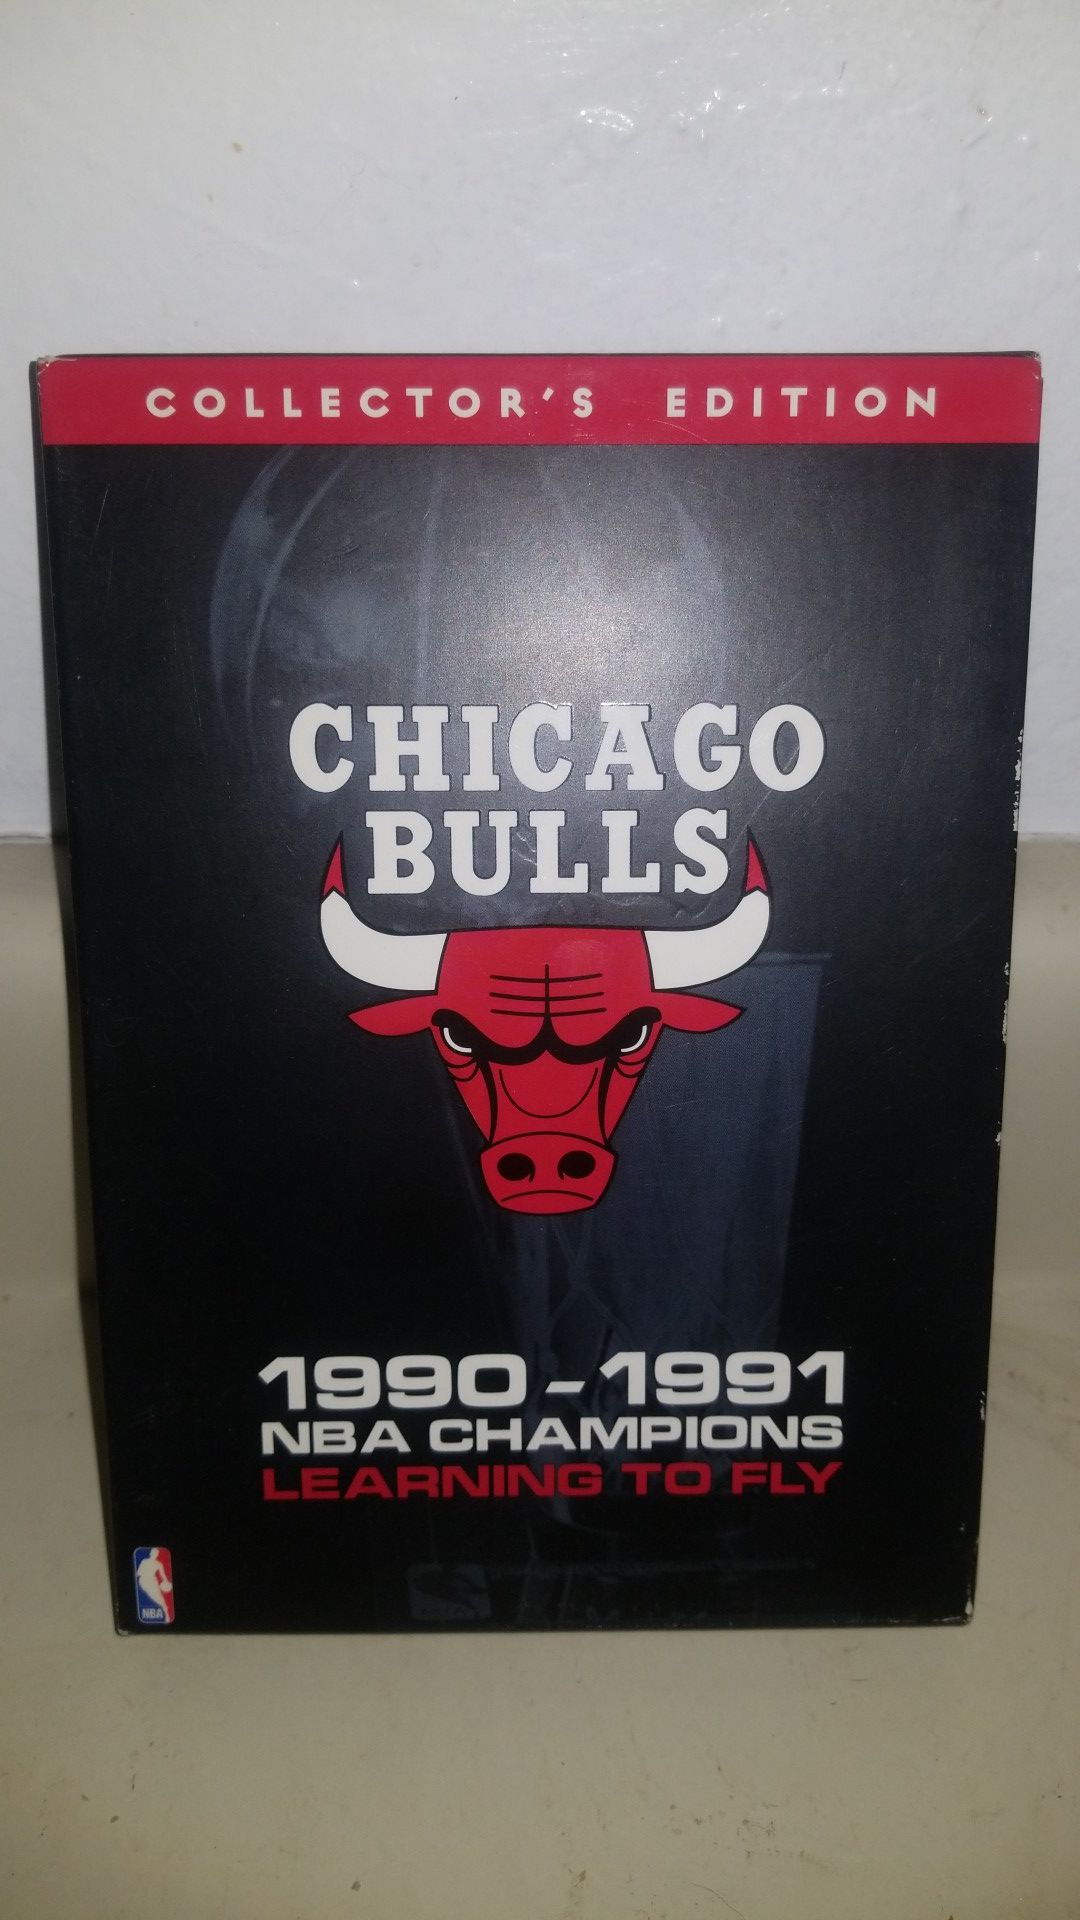 Collector's Edition Chicago Bulls!